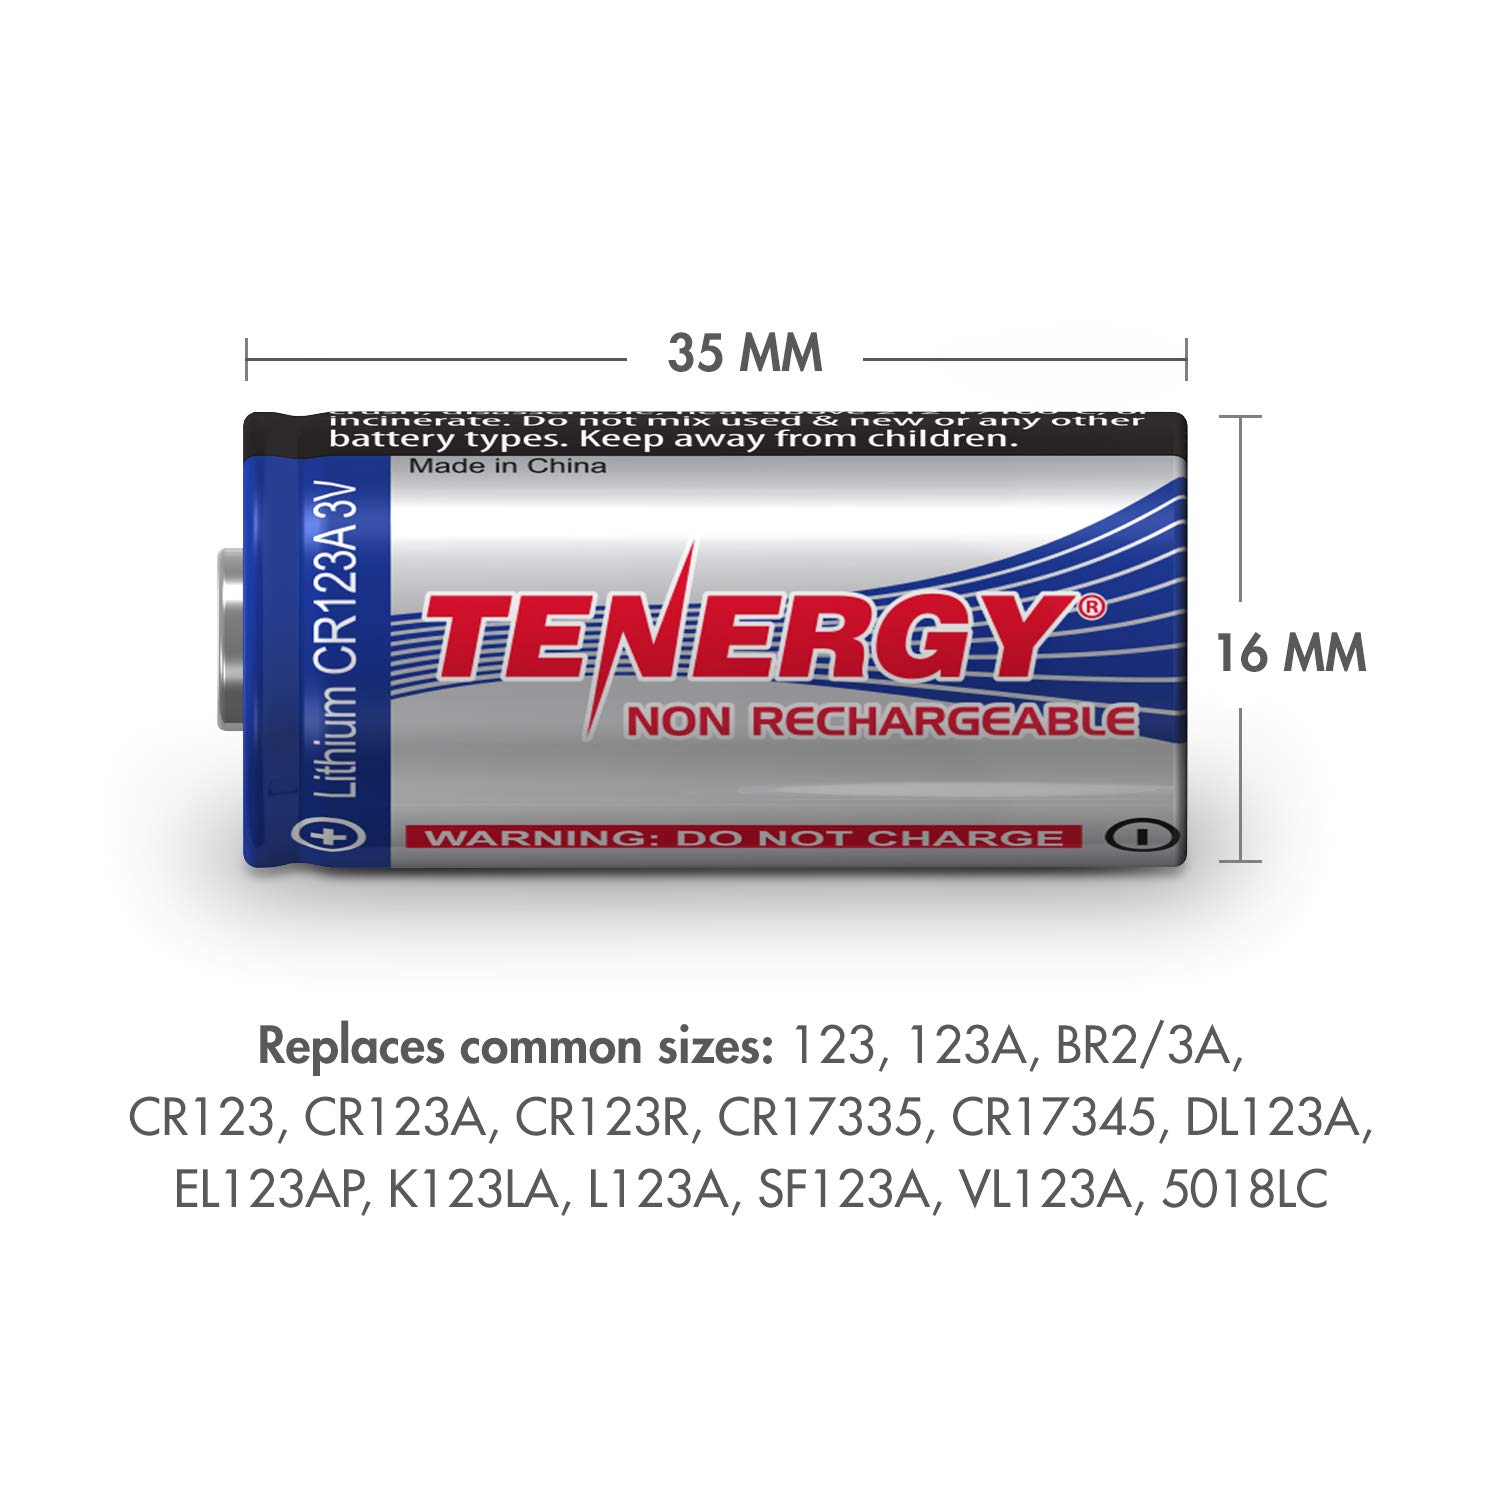 Tenergy 3V CR123A Lithium Battery, High Performance 1500mAh CR123A Cell Batteries [UL Certified] PTC Protected, Smart Sensors Replacement CR123A Batteries, 24 Pack (Non-Rechargeable)